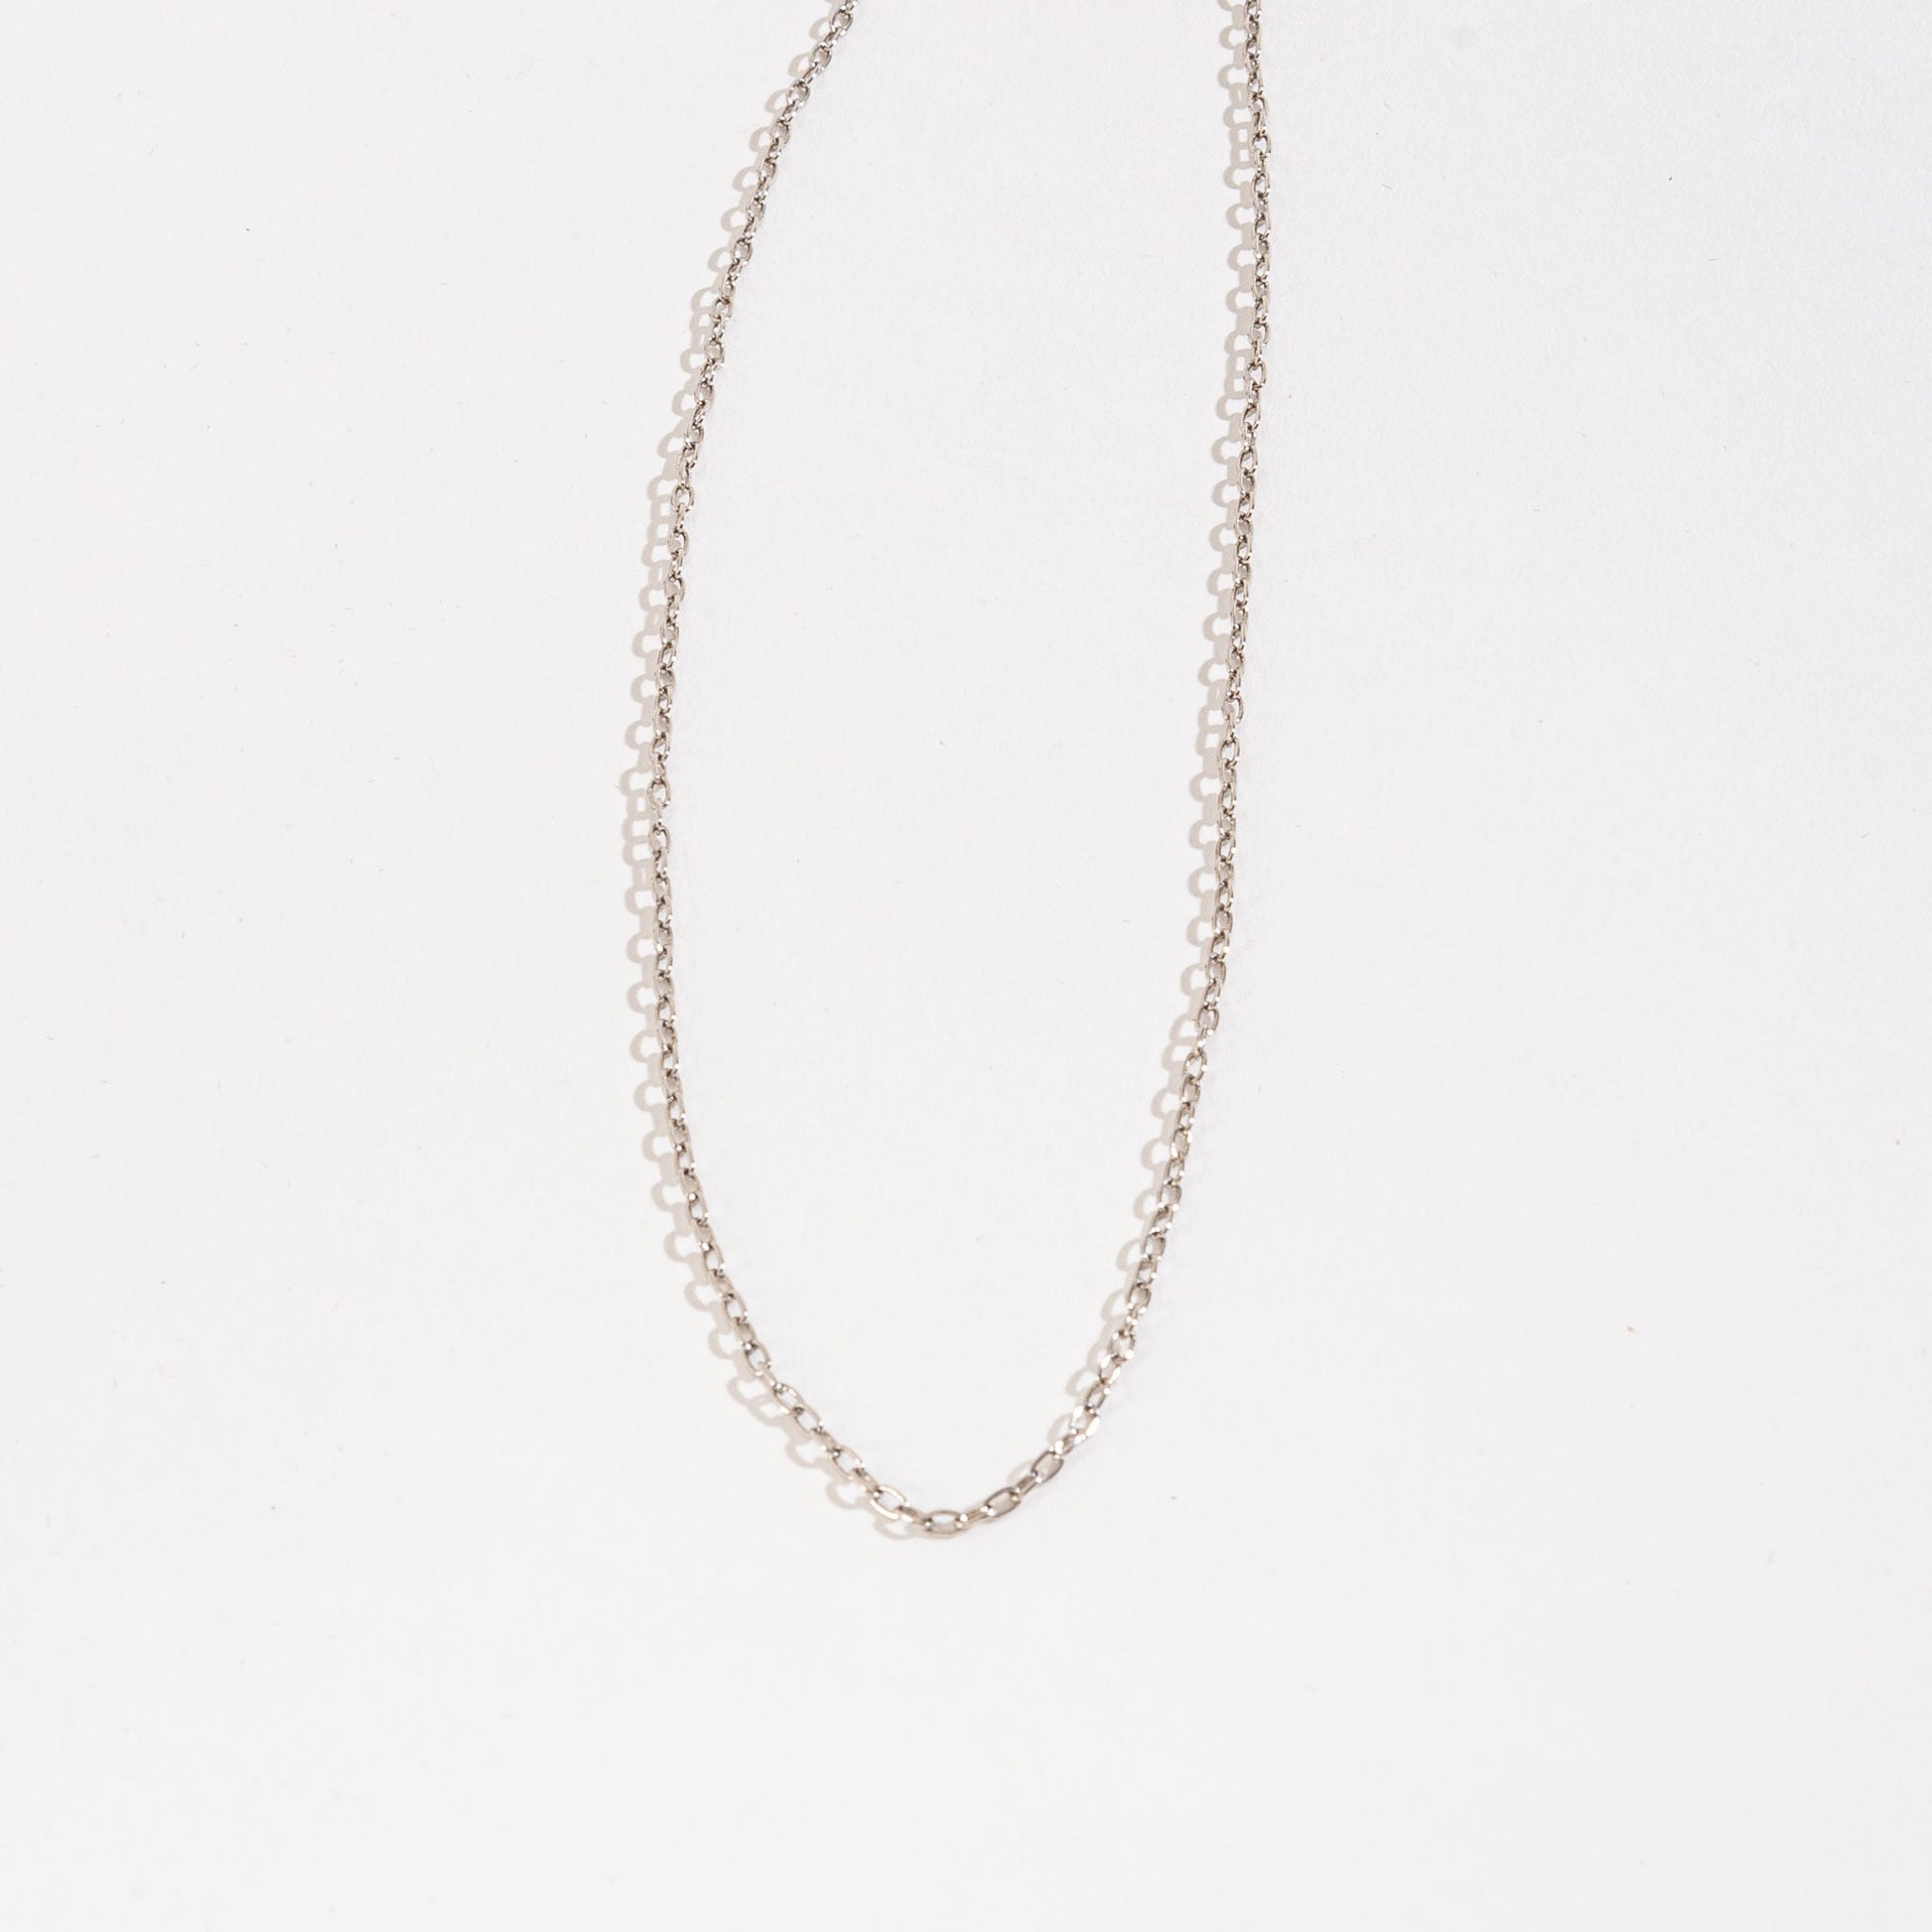 2Mm Oval Chain Necklace